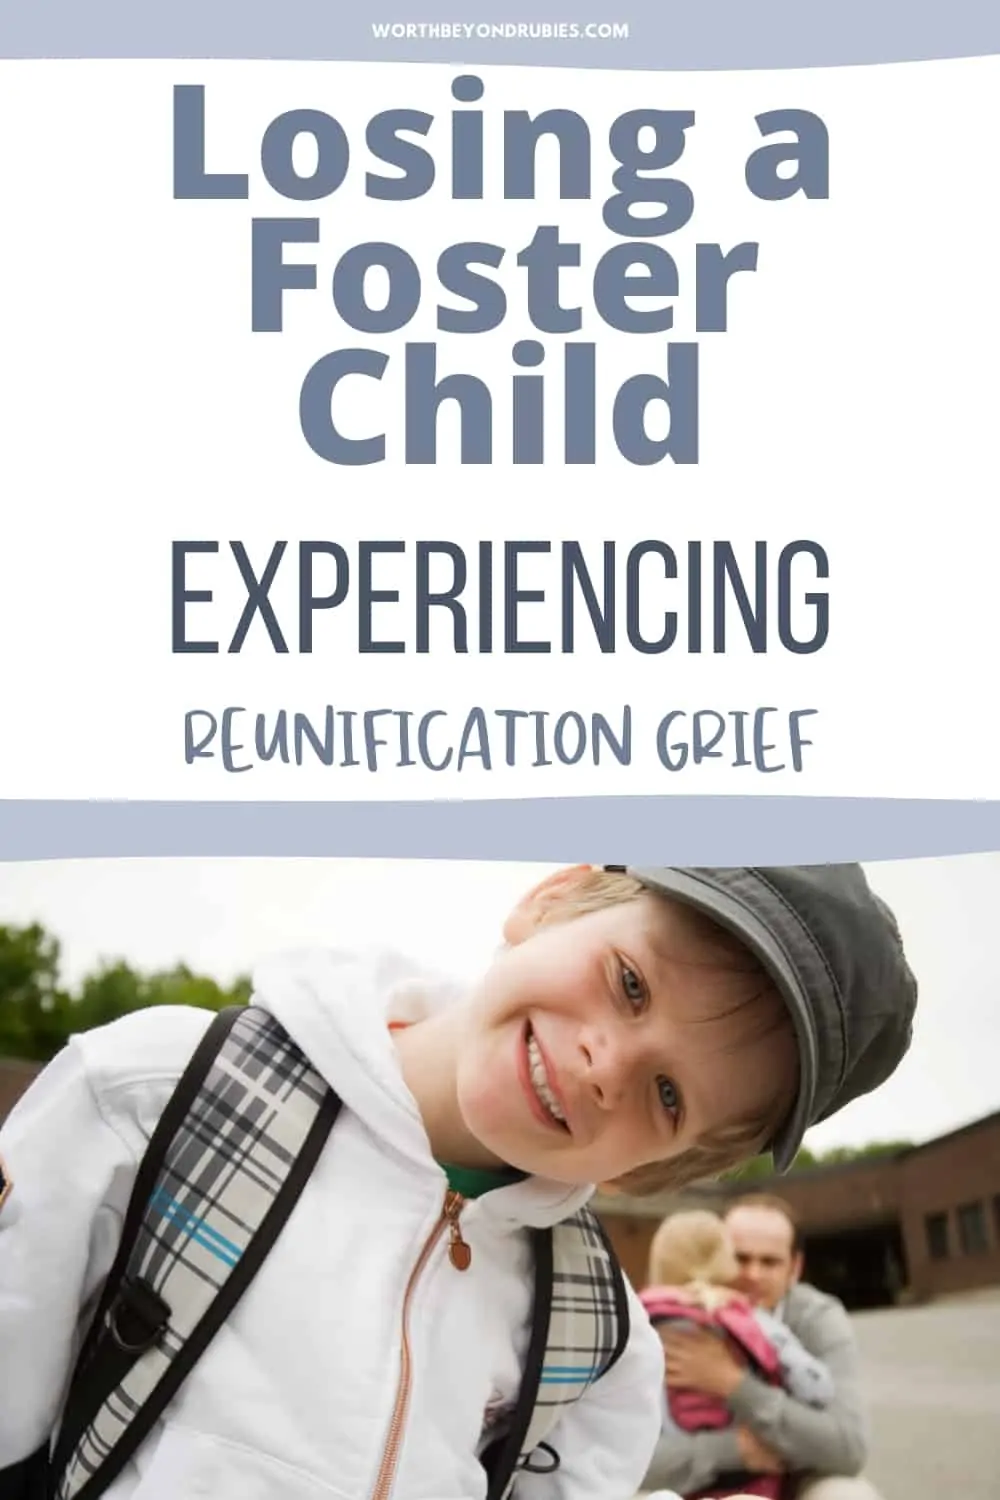 An image of a little boy with a ball cap on and a backpack with a little girl behind him hugging a man and text that says Losing a Foster Child - Experiencing Reunification Grief